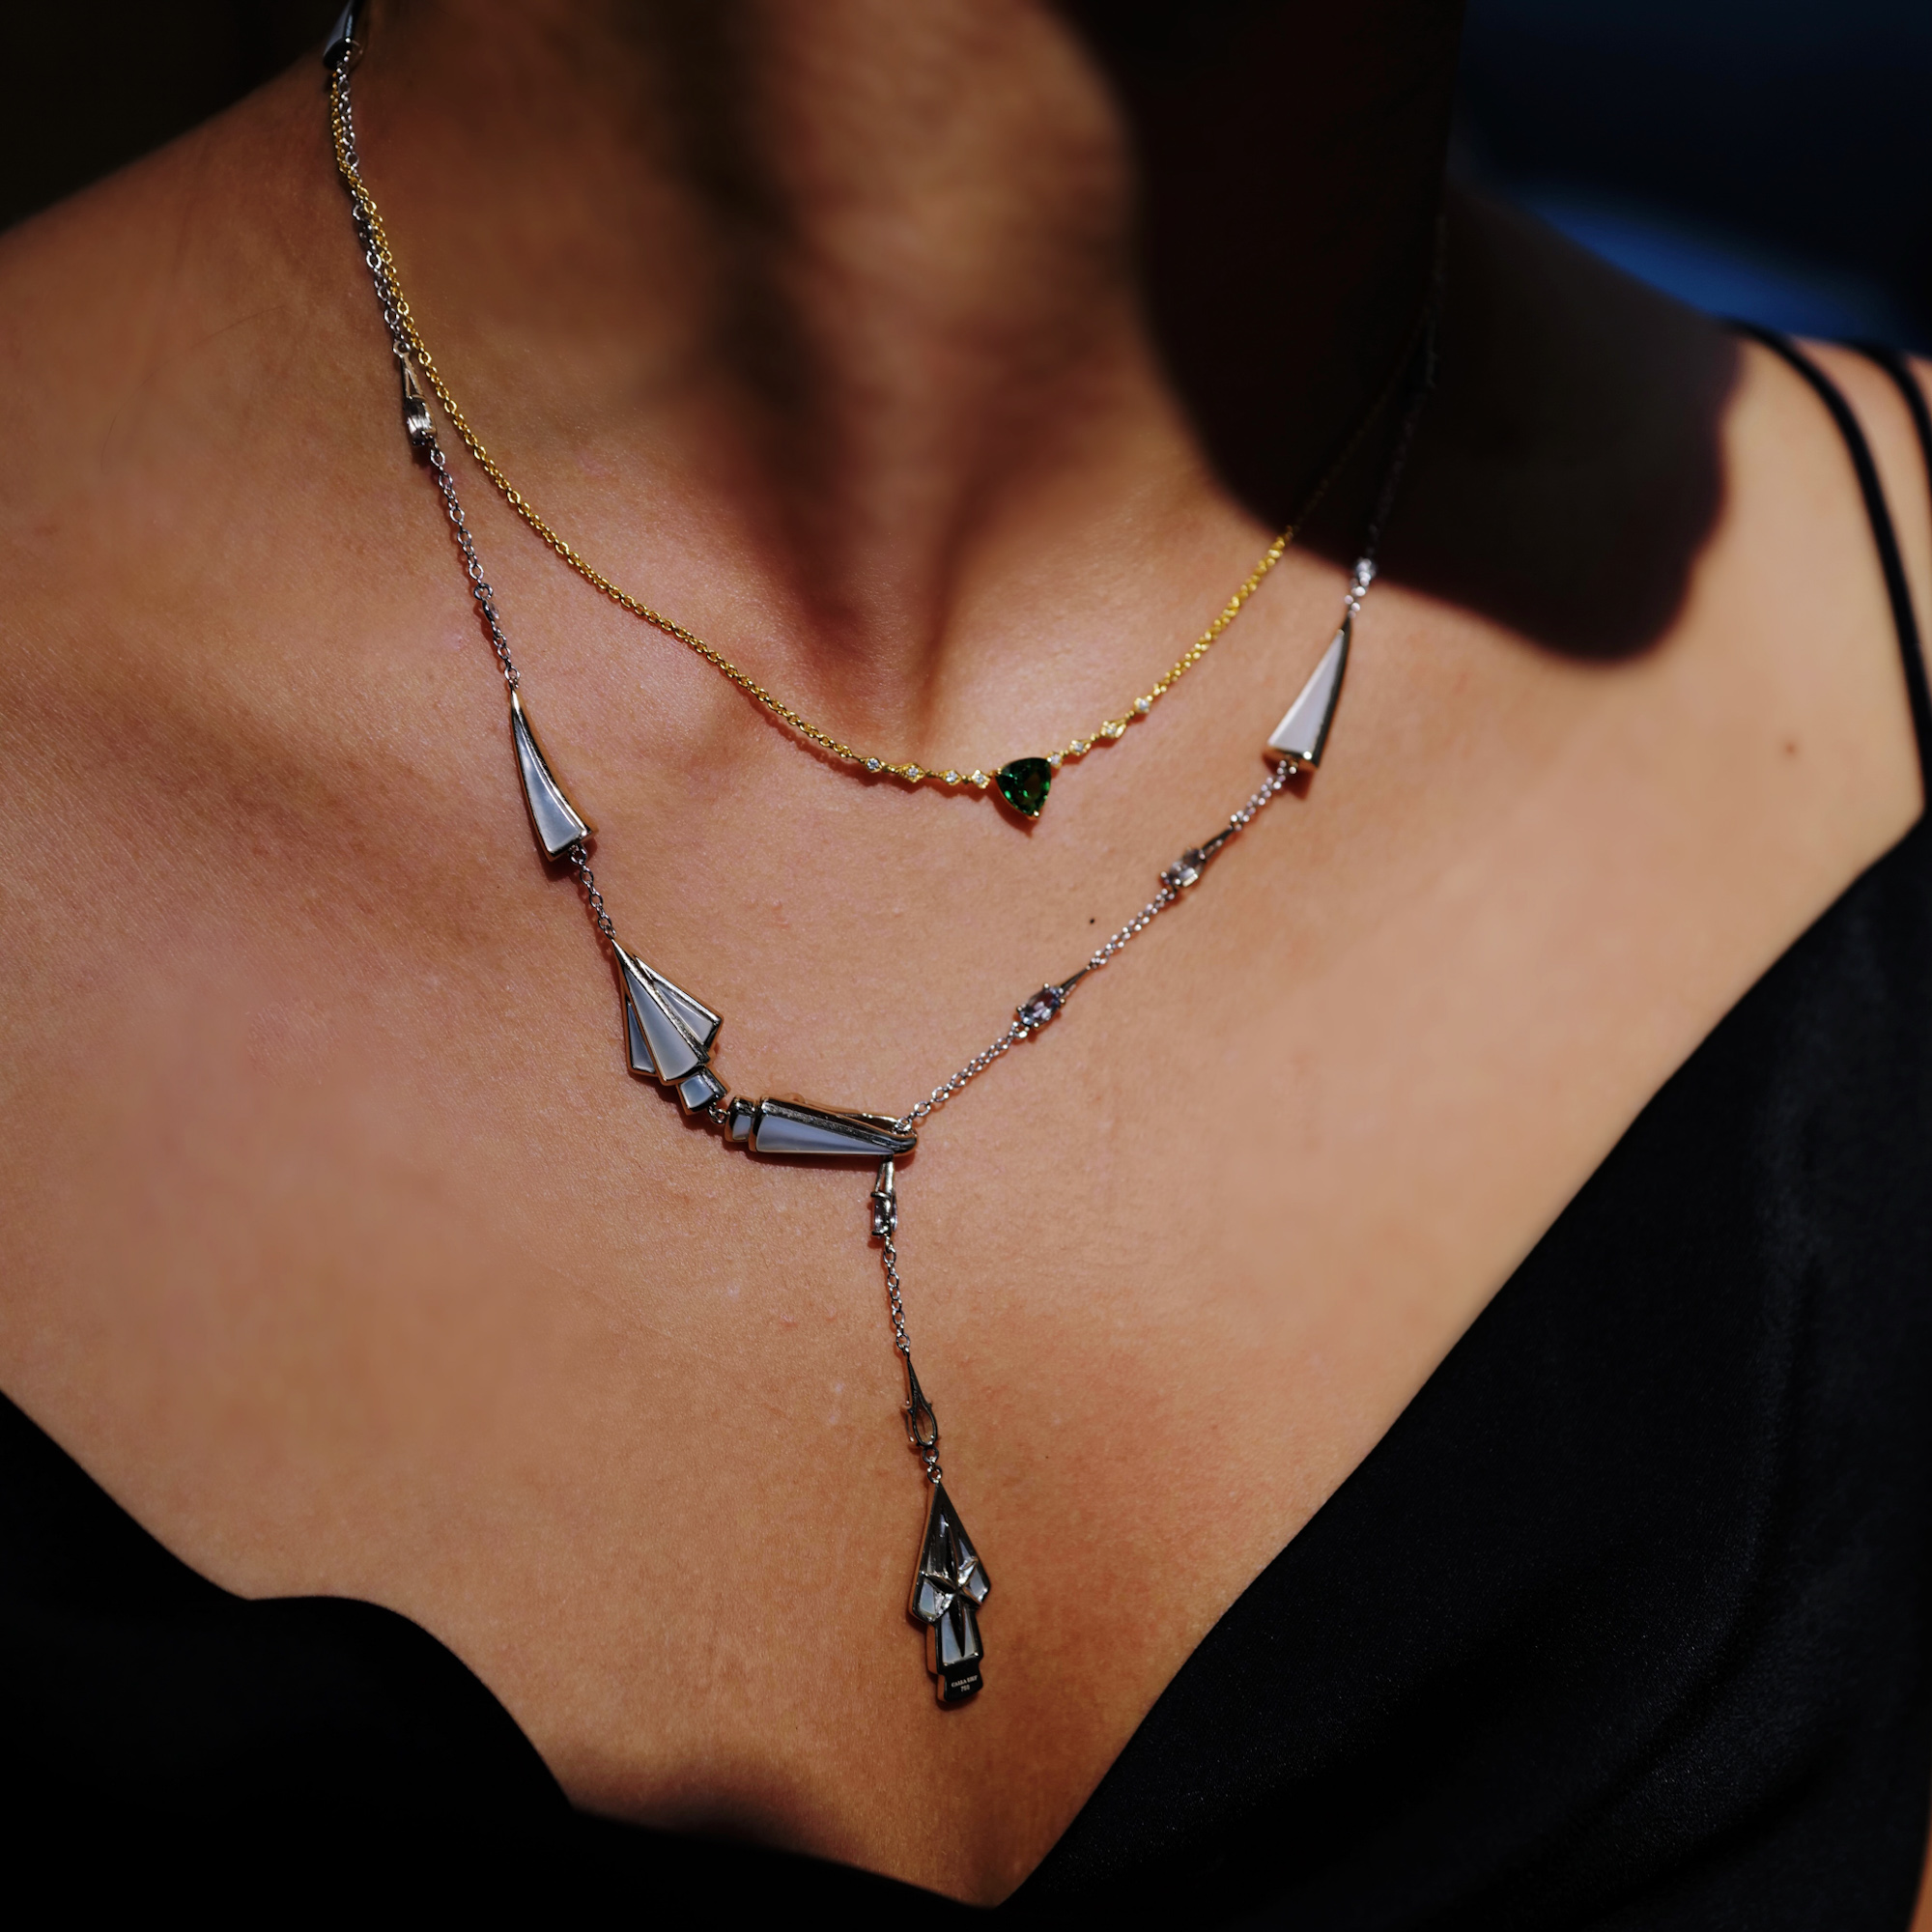 Have fun with necklace layering!